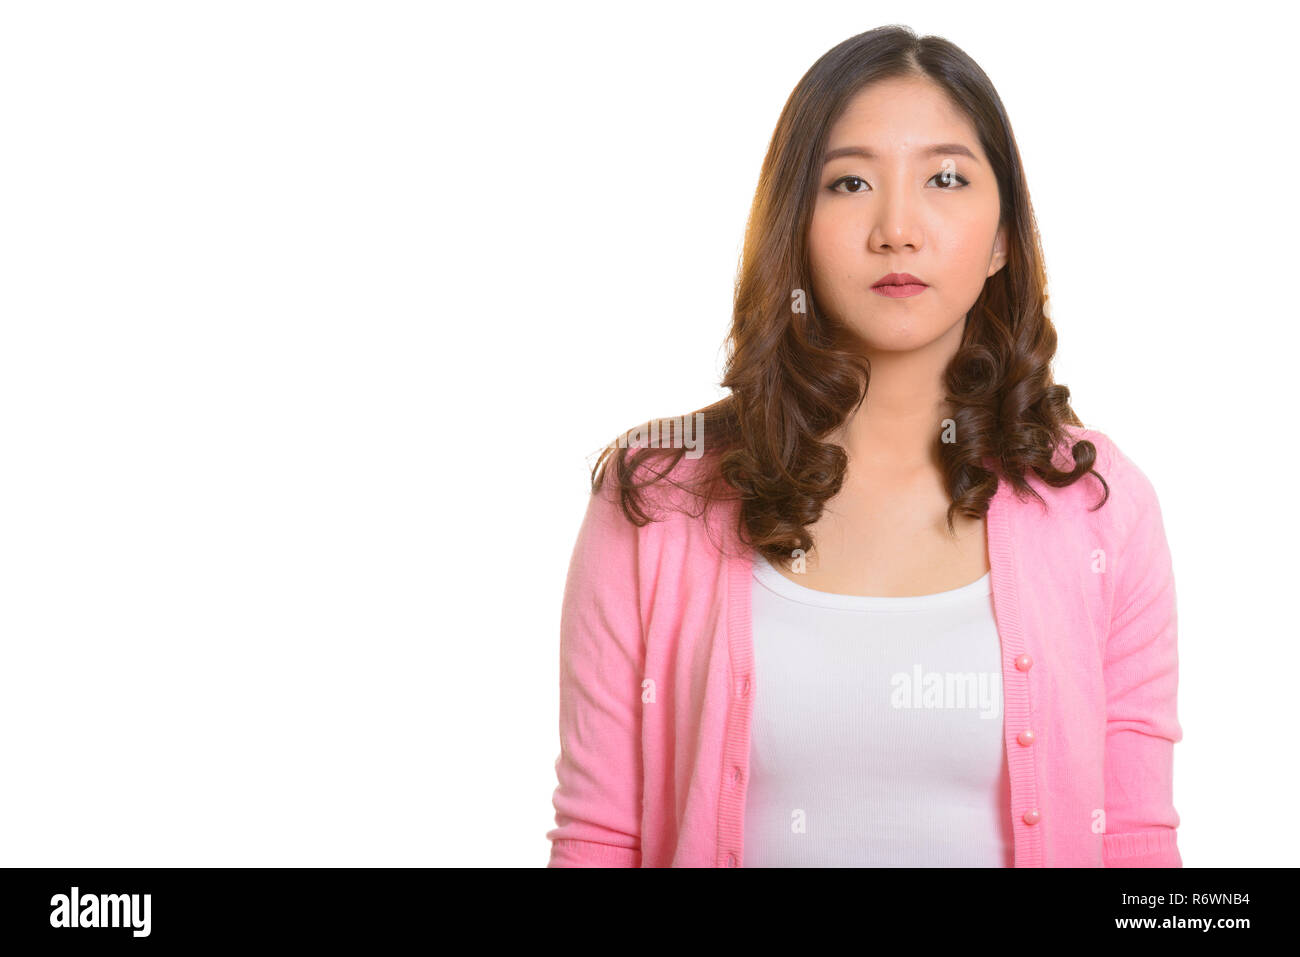 Portrait of young beautiful Asian woman against white background Stock Photo